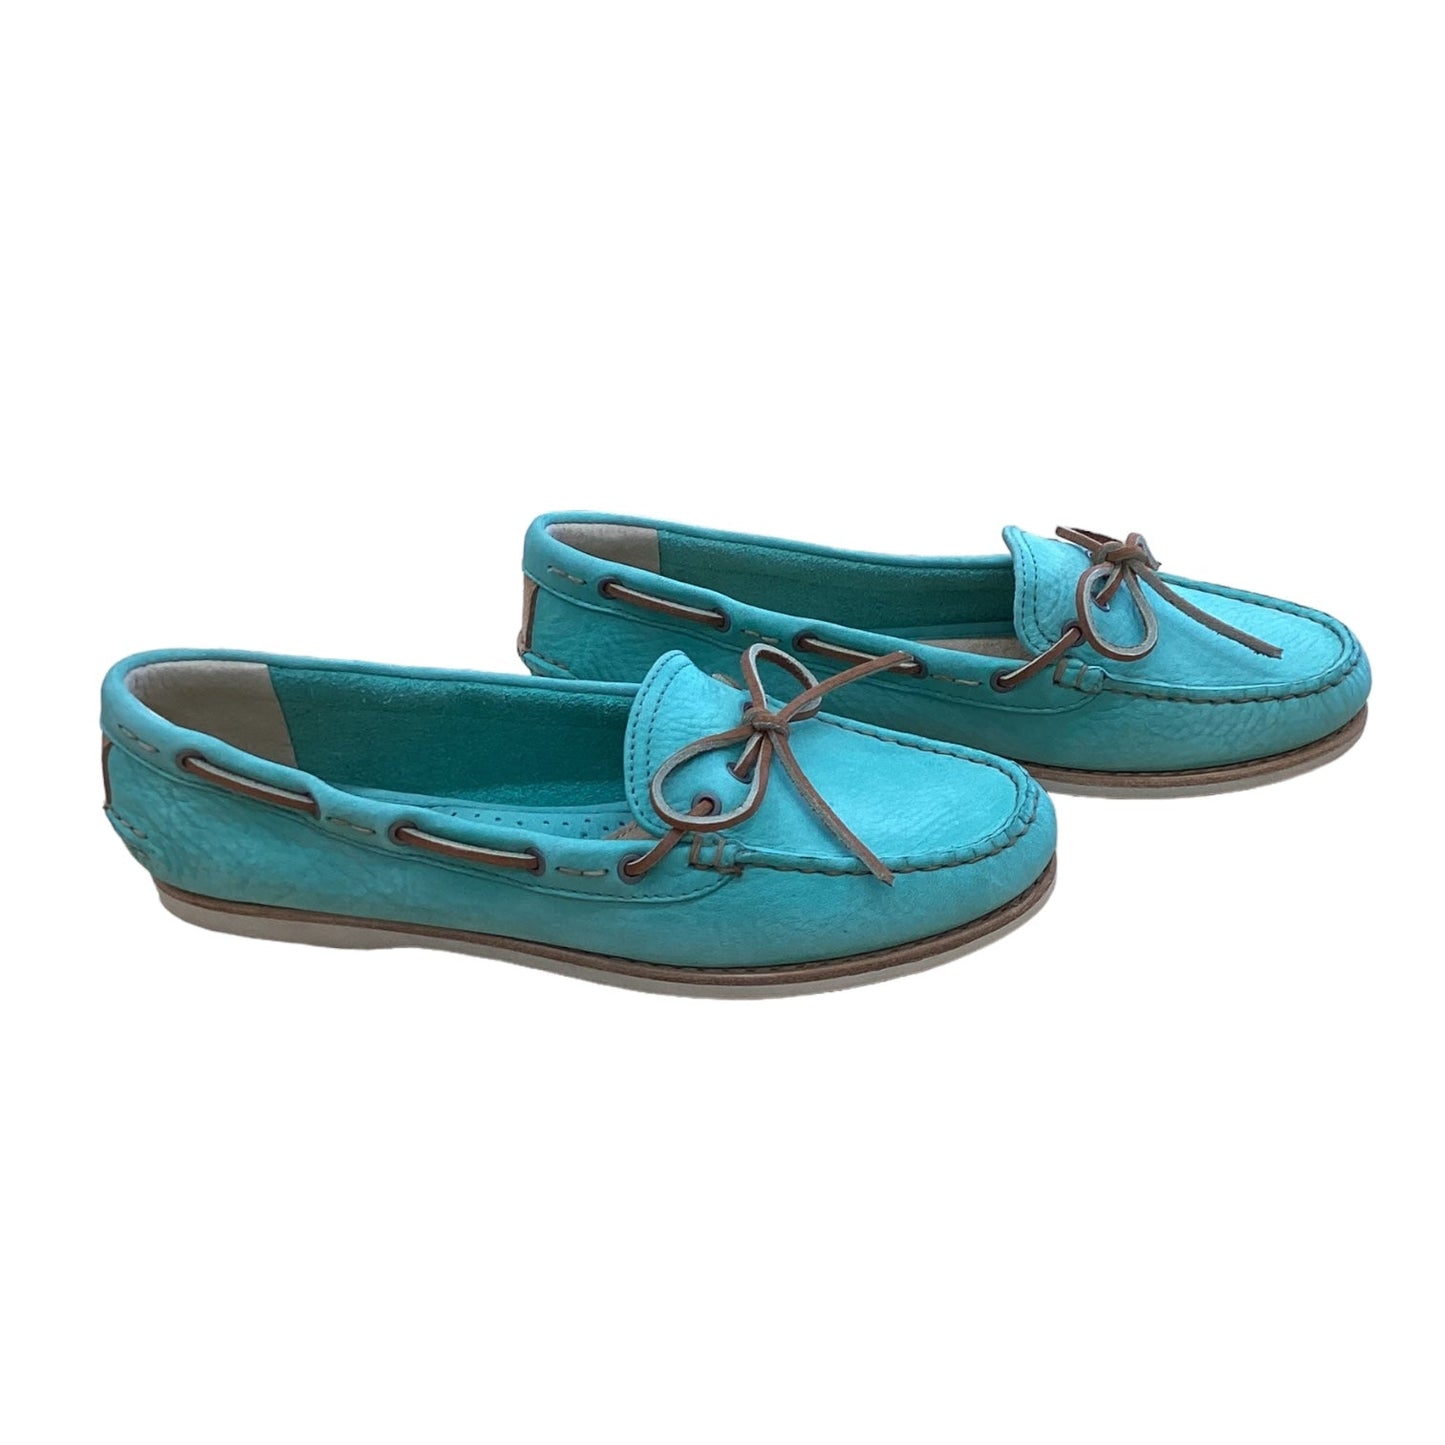 Teal Shoes Flats Frye, Size 8